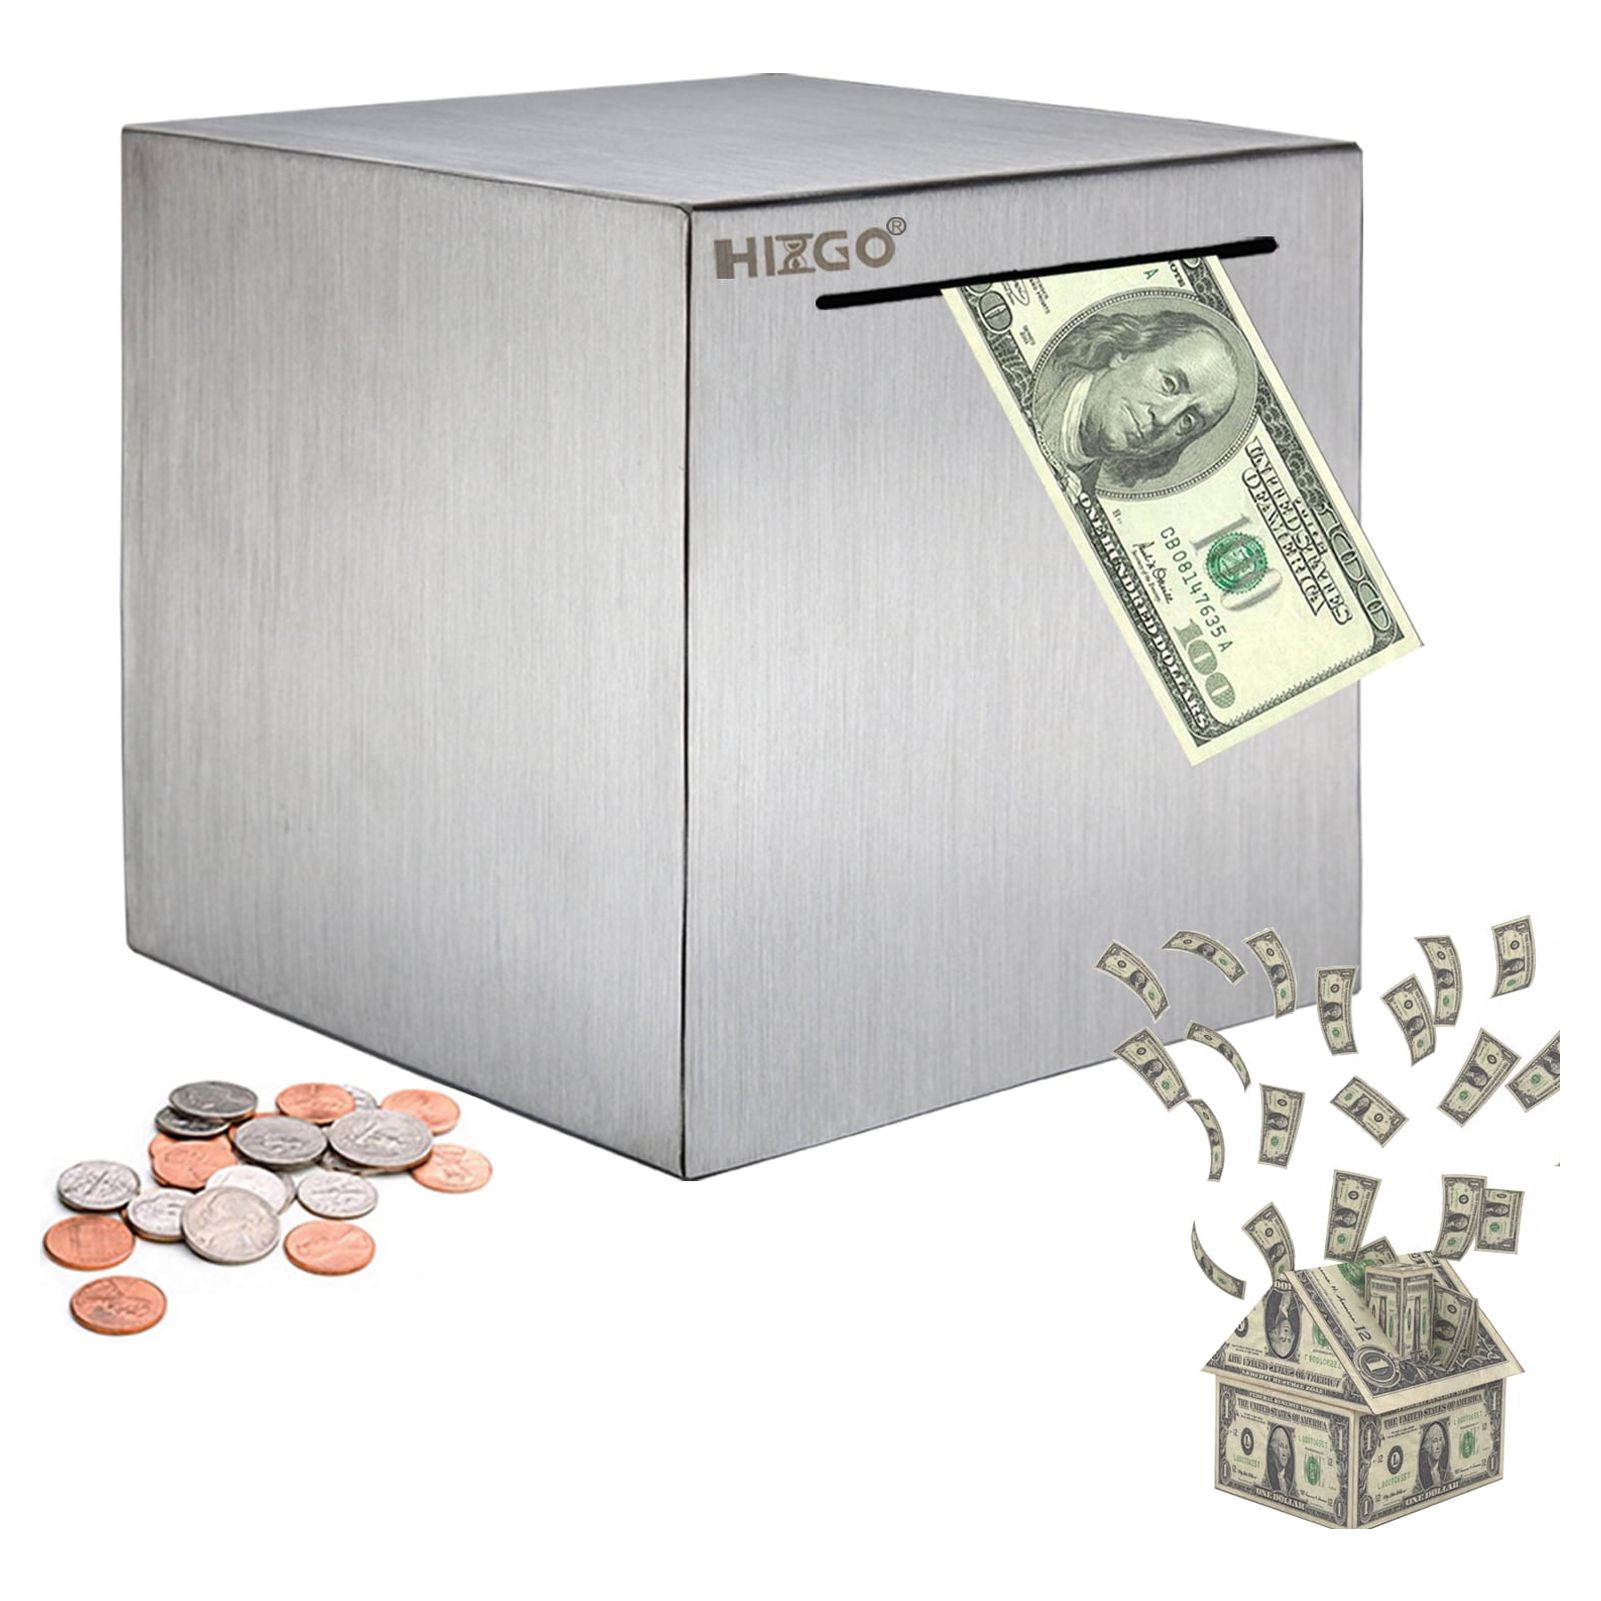 Hizgo Piggy Bank for Adults Stainless Steel Savings Bank to Help Budget and Save Must Break to Access Money（4.72 inch） - image 1 of 7